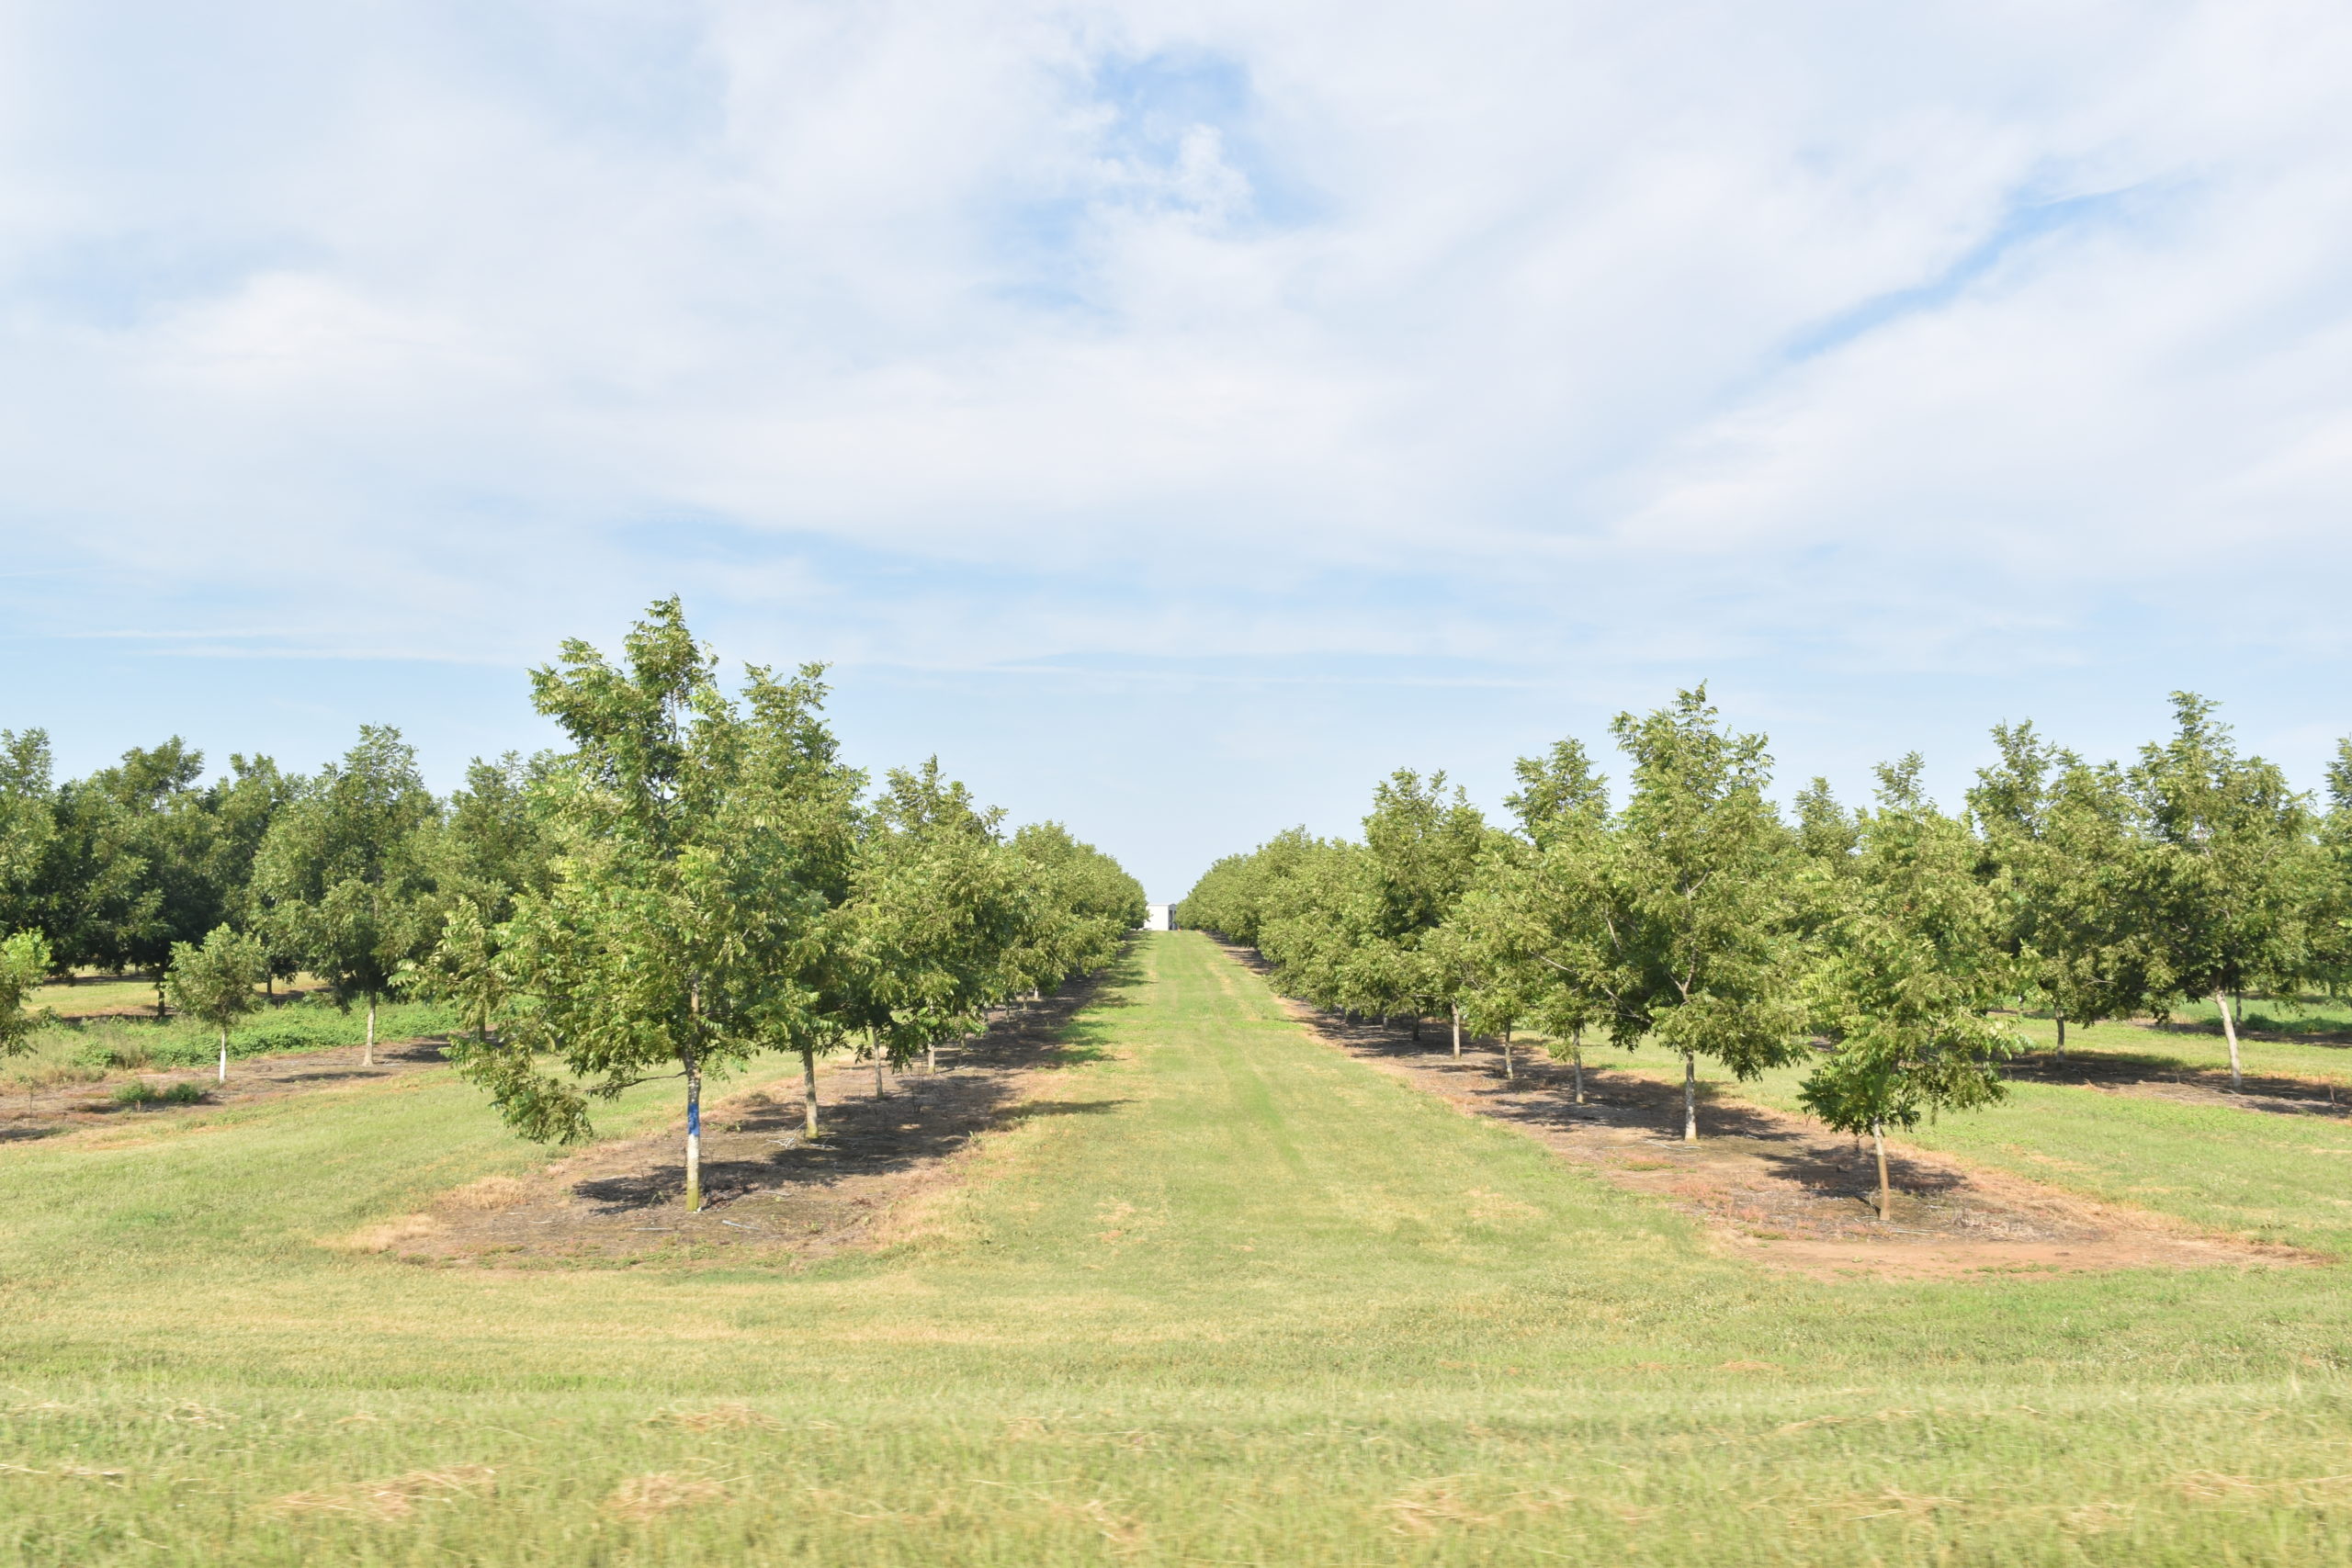 Rows of 6-year-old pecan trees in an orchard in Georgia.